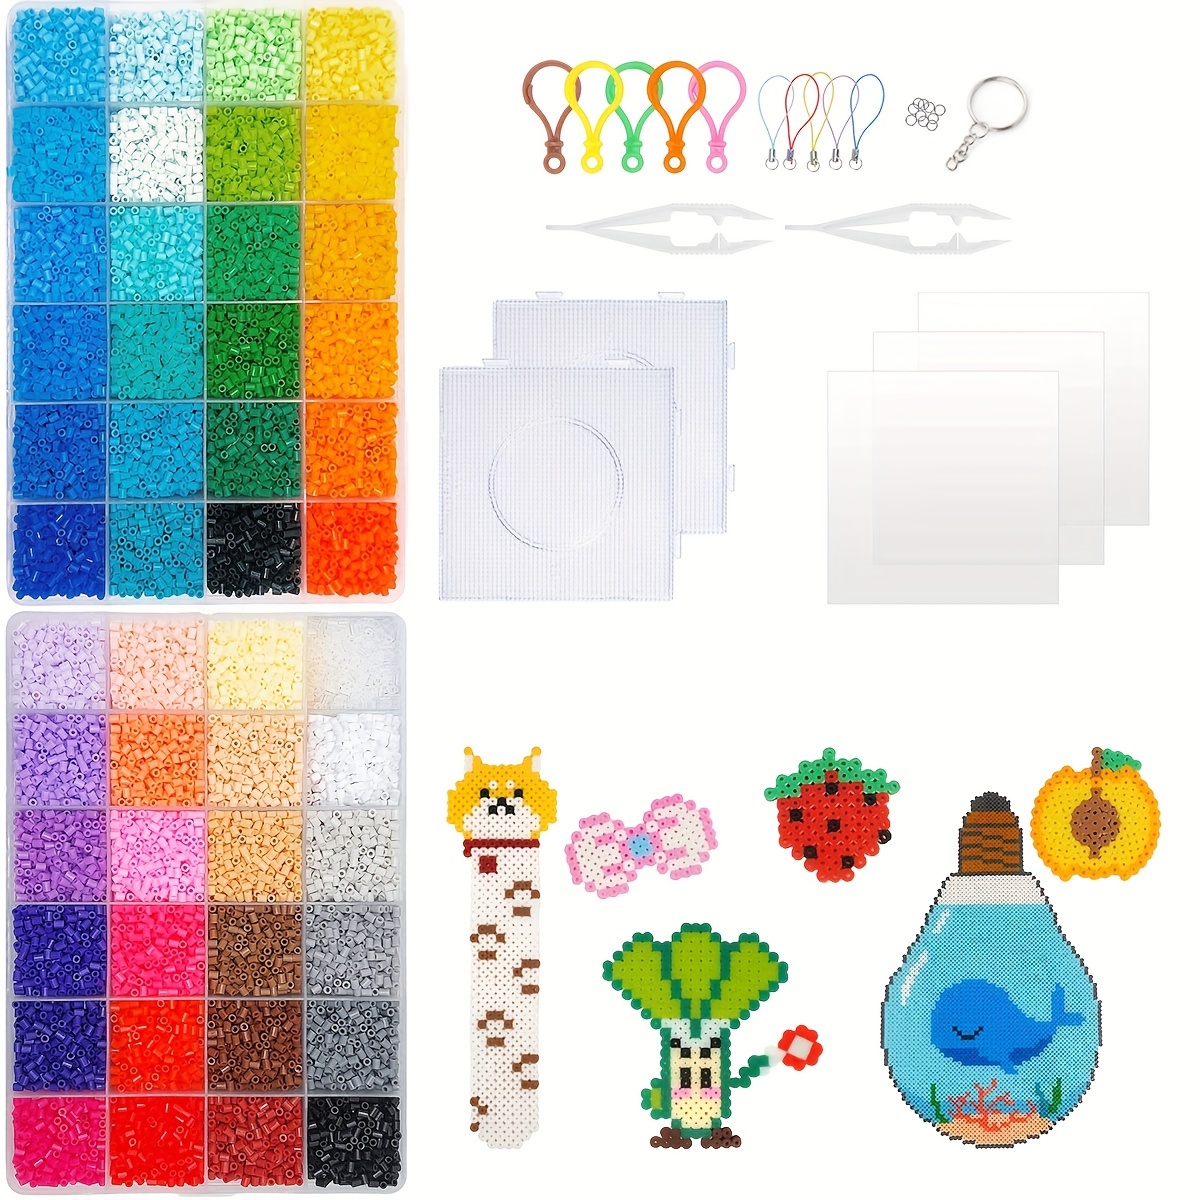 Frcolor Beads Fuse Pegboard Bead BeadsPegboards Kit Sets Pearler Crafts  Kids Melting Melty Board Geometric Boards 